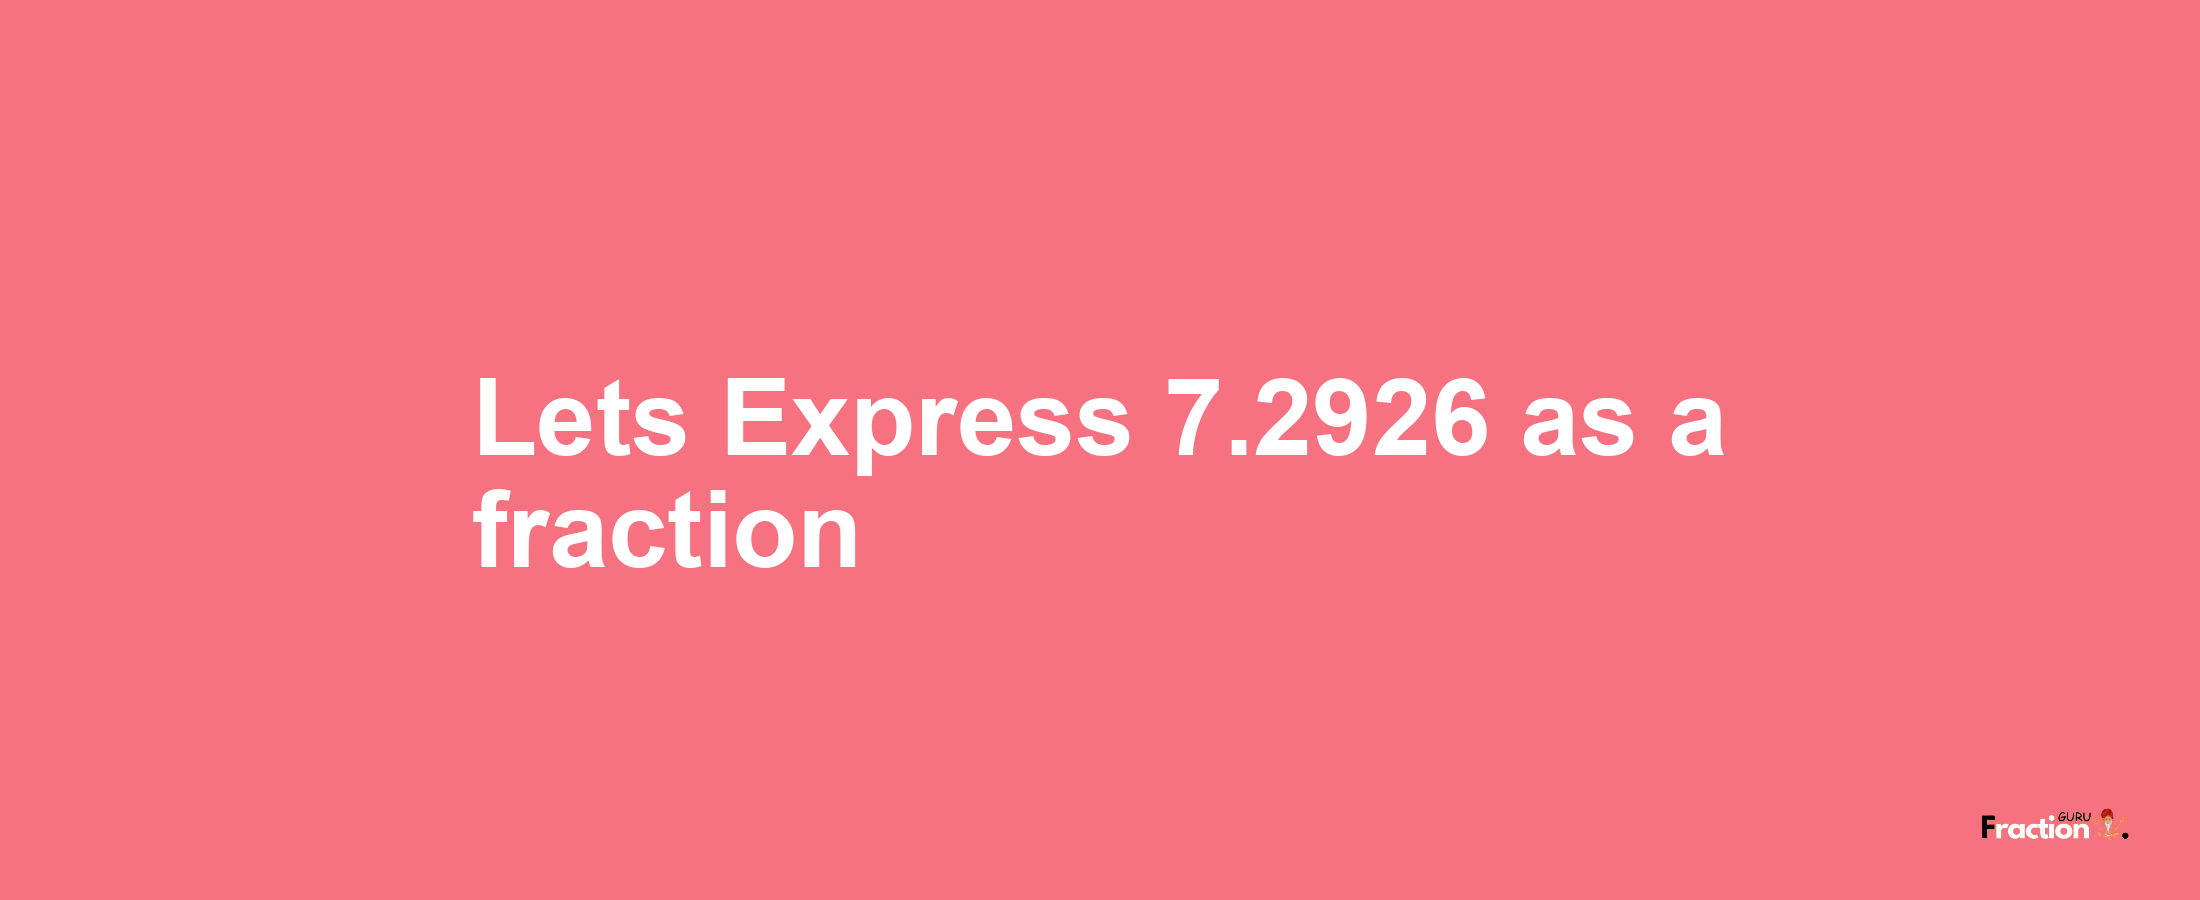 Lets Express 7.2926 as afraction